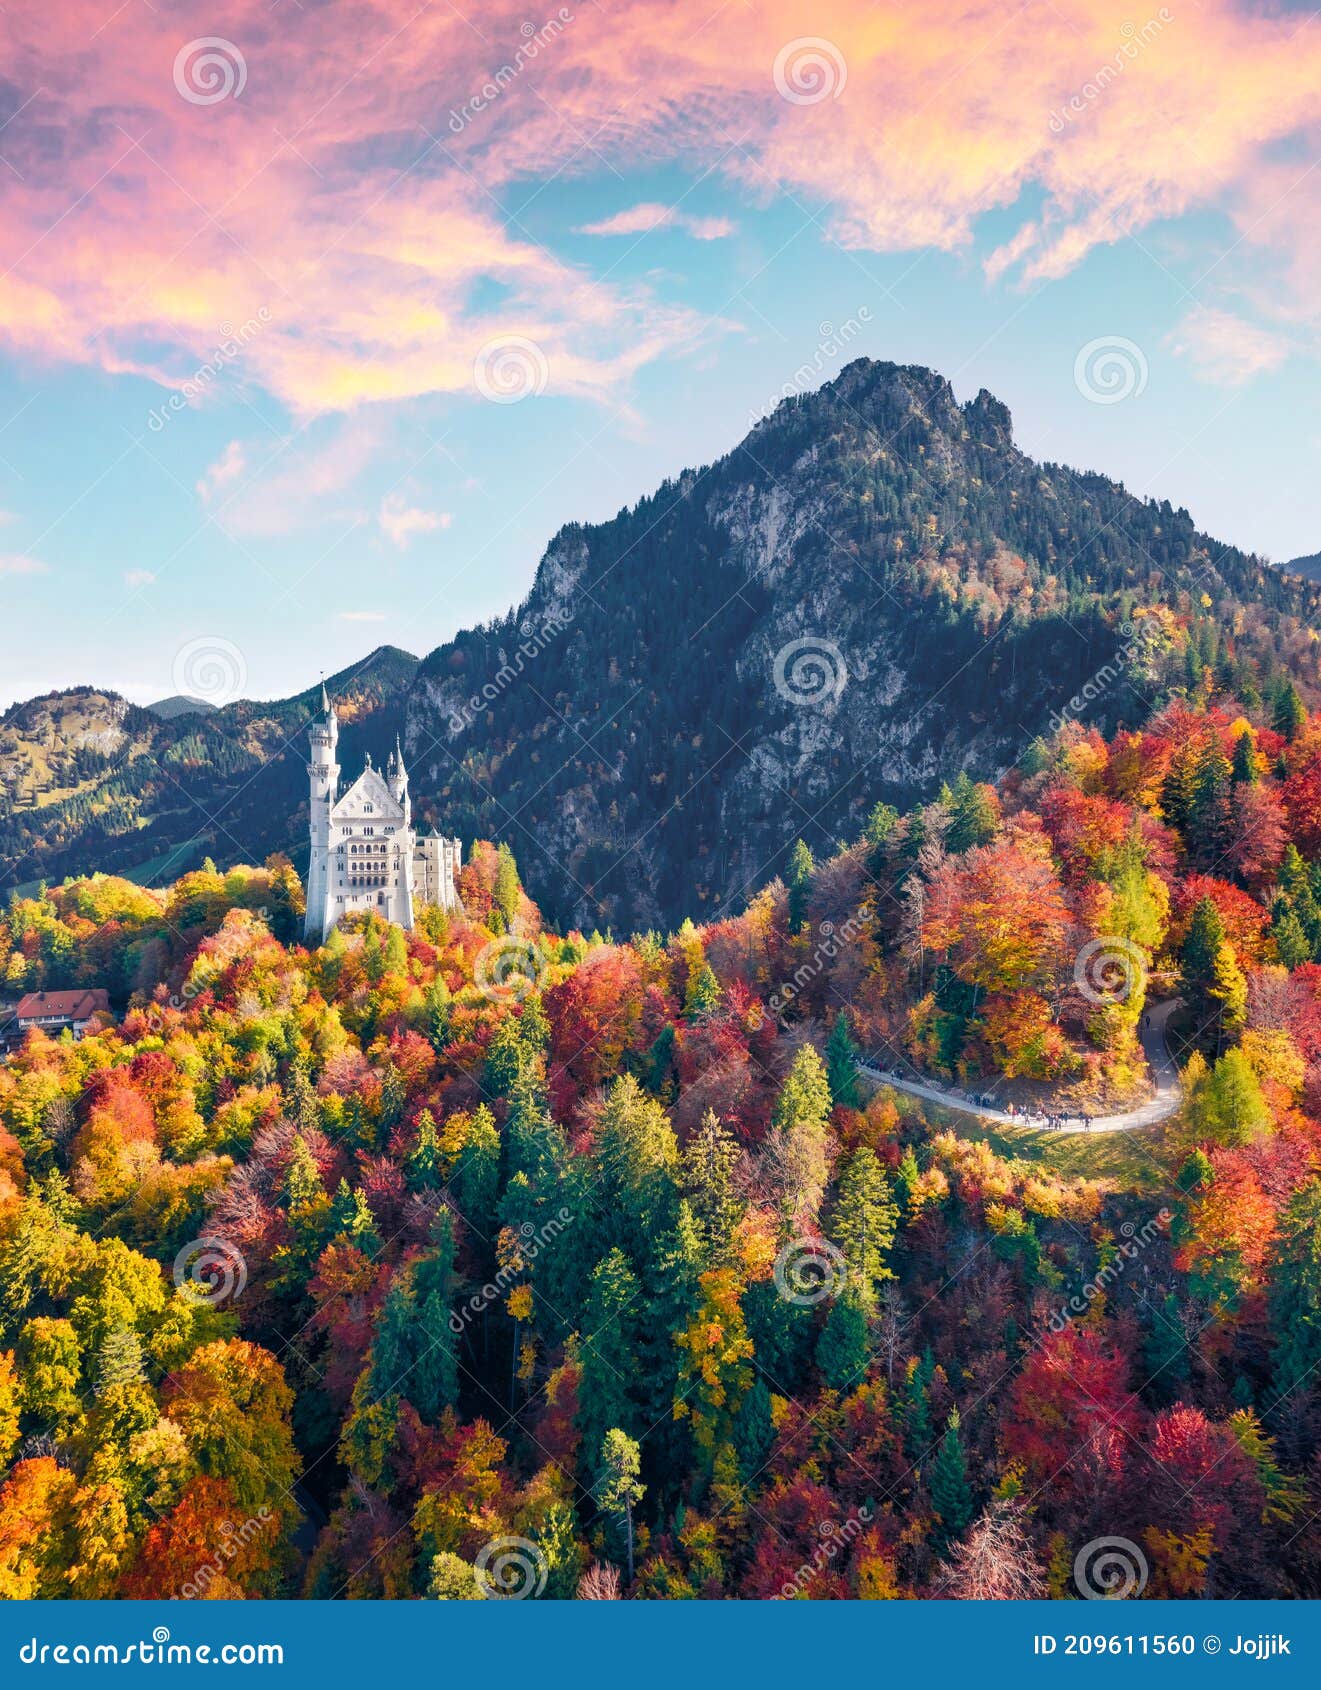 View from Flying Drone. Amazing Autumn Scene of Castle, 19th-century Hilltop Fairytale Stock Photo - Image of background, german: 209611560